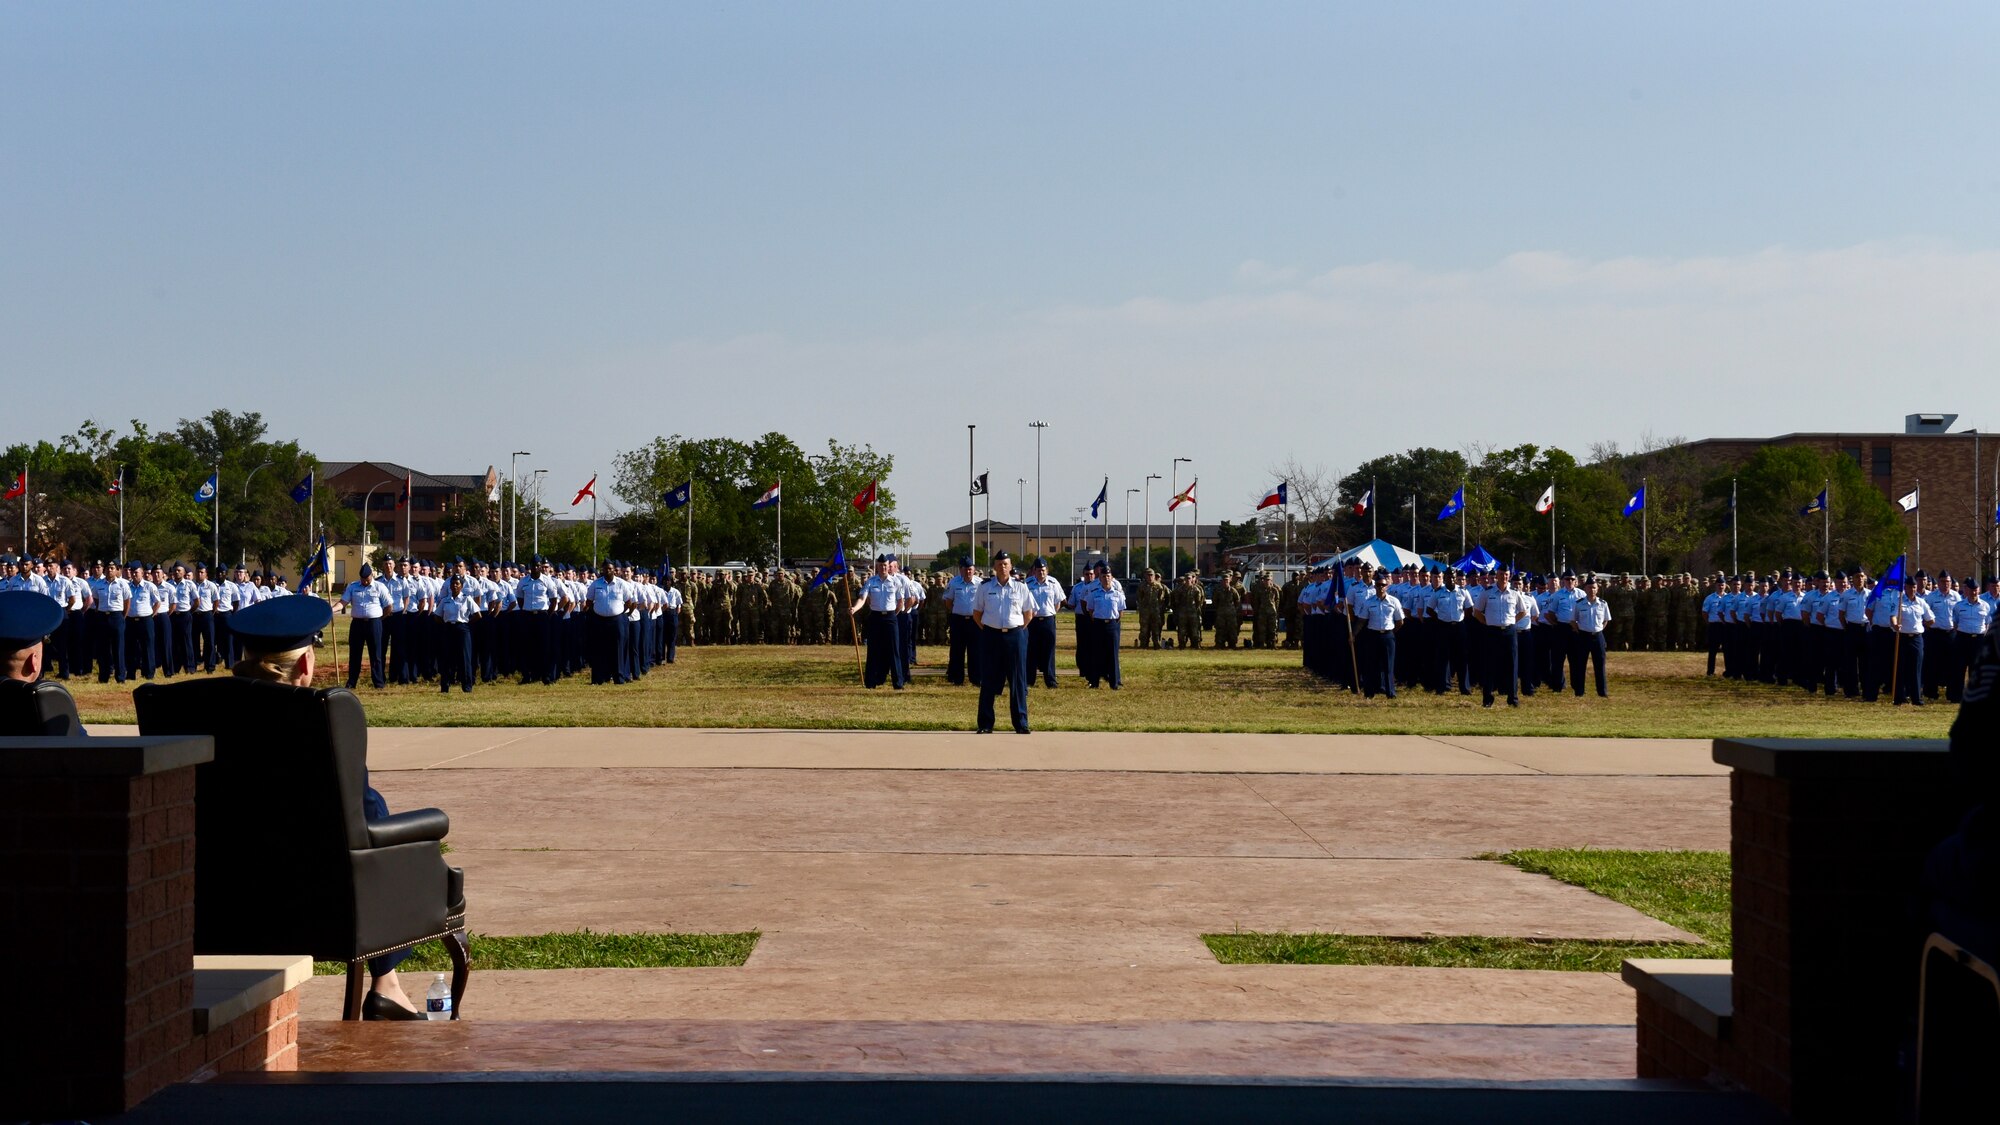 Col. Kirk Peterson, 82nd Training Wing vice commander, stands at attention with Airmen during the 82nd TRW Change of Command Ceremony at Sheppard Air Force Base, Texas, June 27, 2023. The Change of Command Ceremony welcomed incoming 82nd TRW commander Brig. Gen. George T.M. Dietrich III.